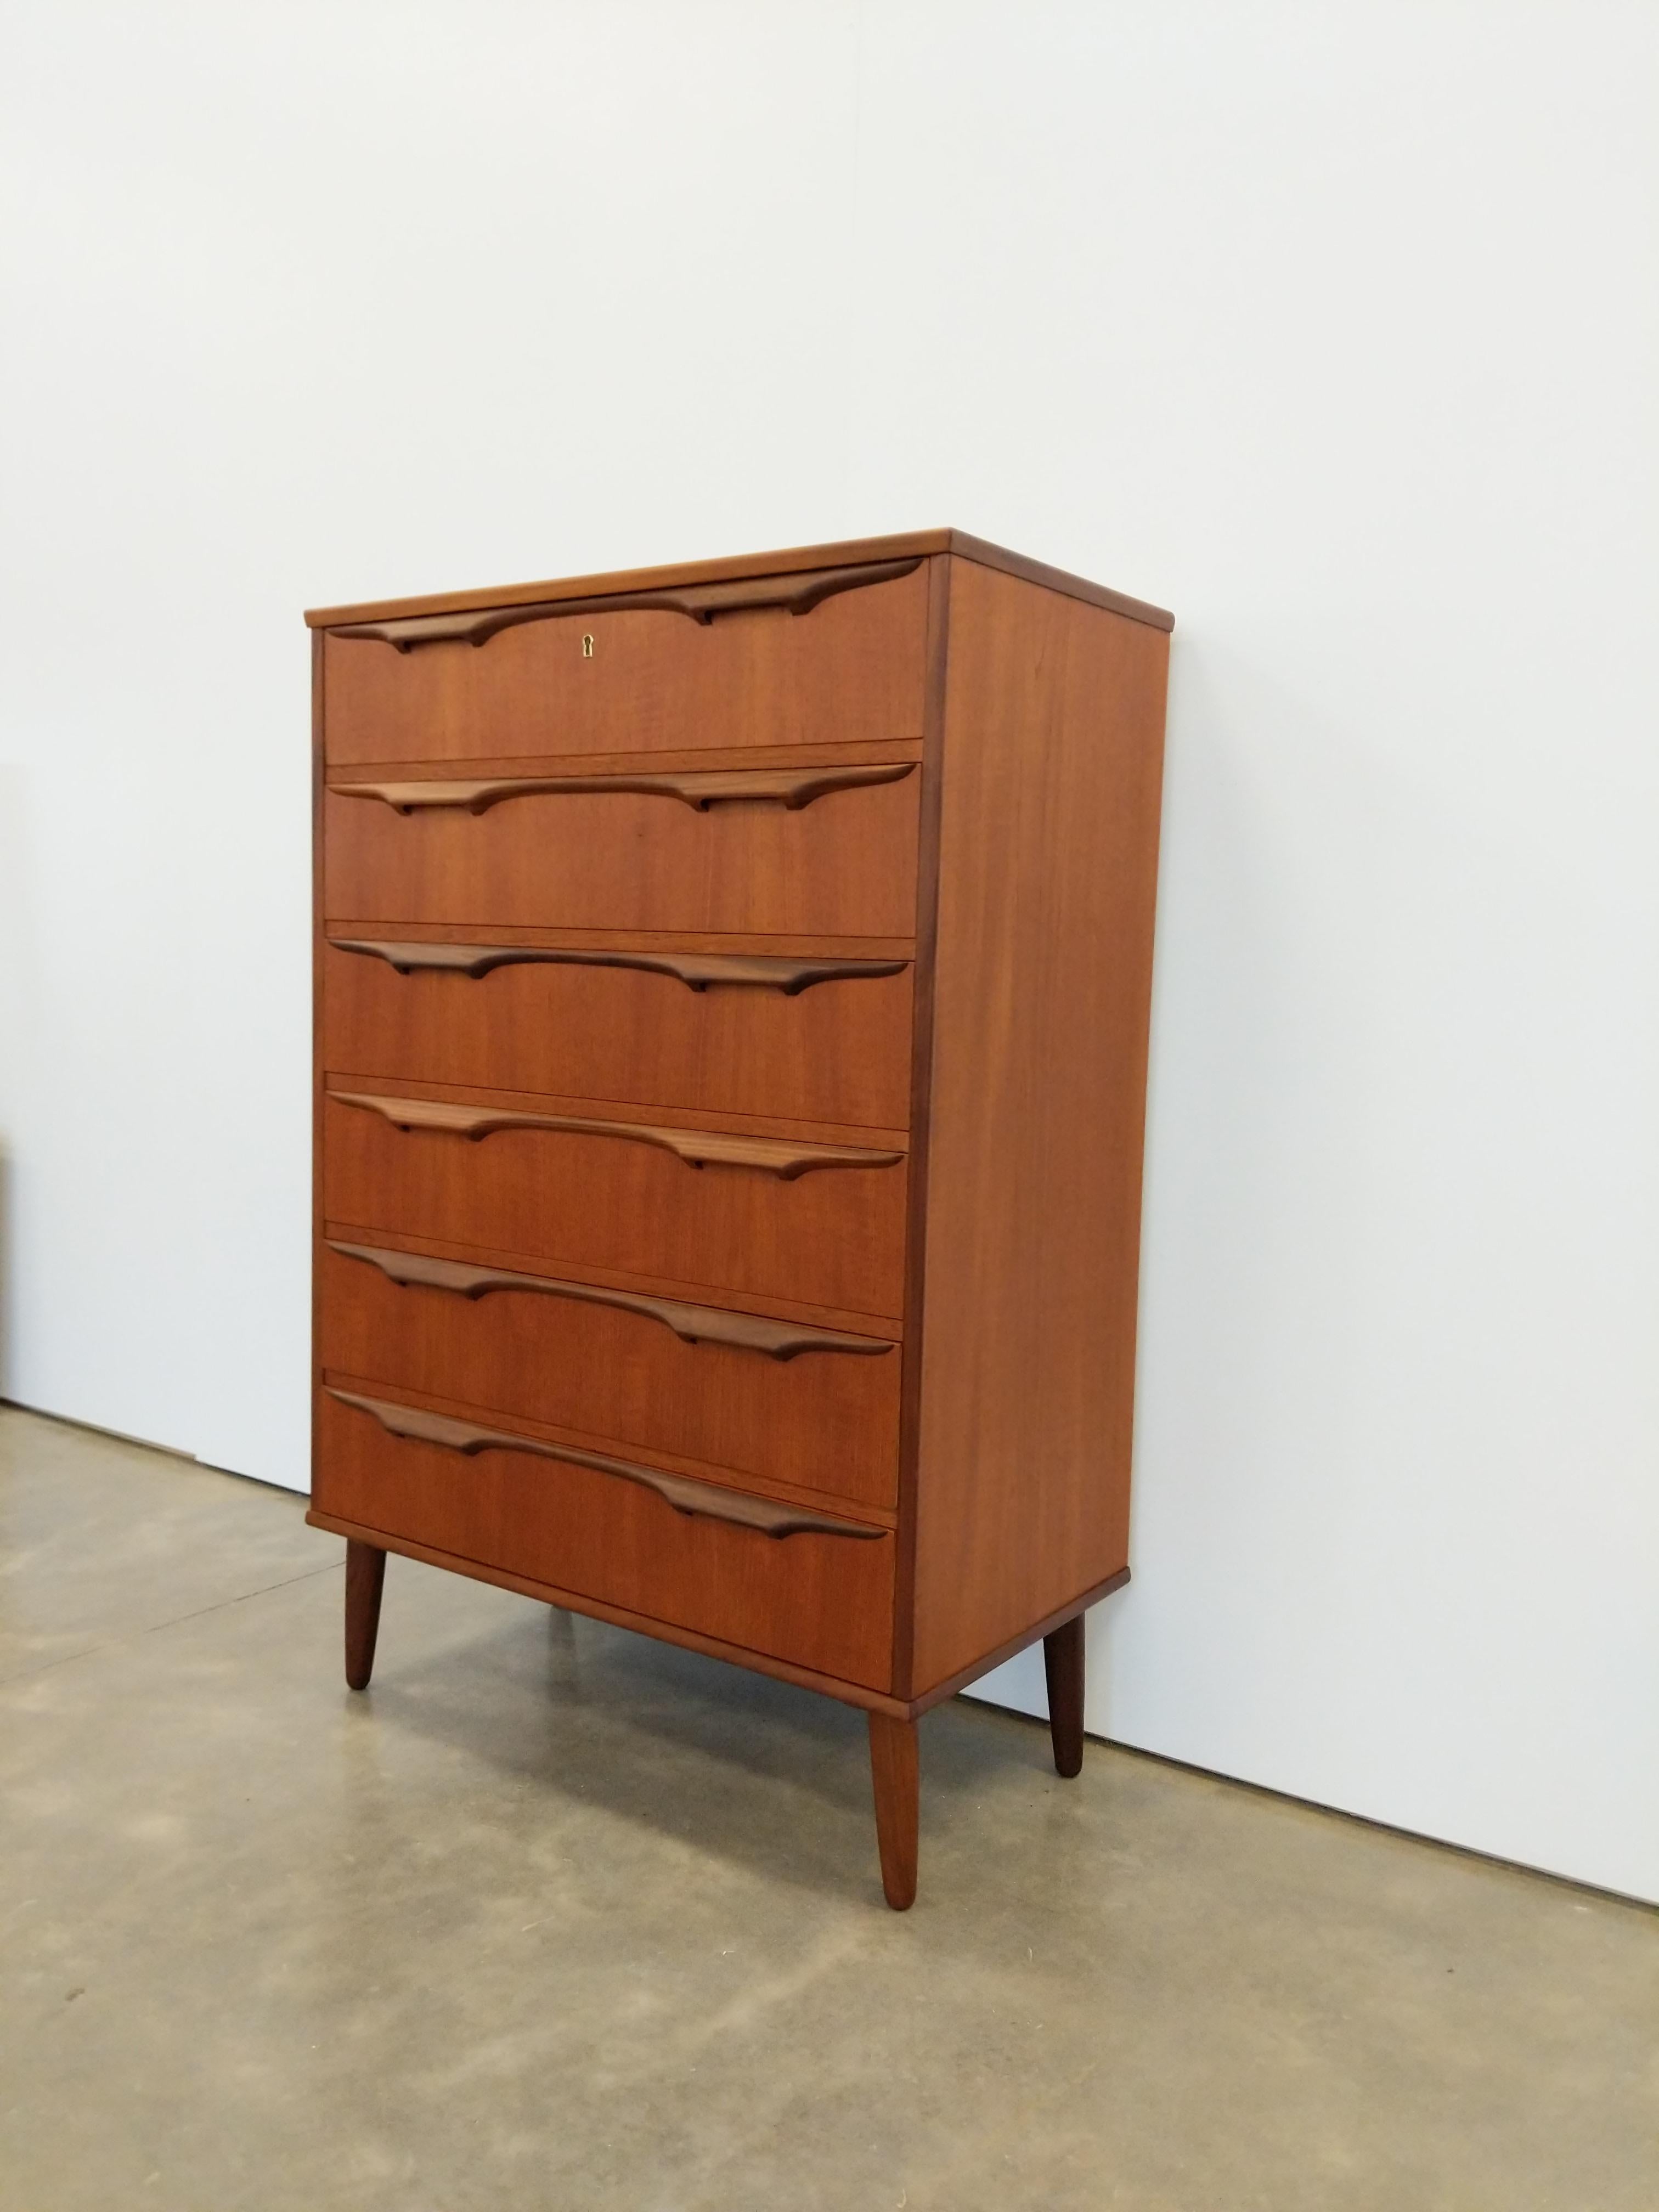 Authentic vintage mid century Danish / Scandinavian Modern teak dresser / chest of drawers.

By Trekanten.

This piece is in excellent refinished condition with very few signs of age-related wear (see photos).

If you would like any additional